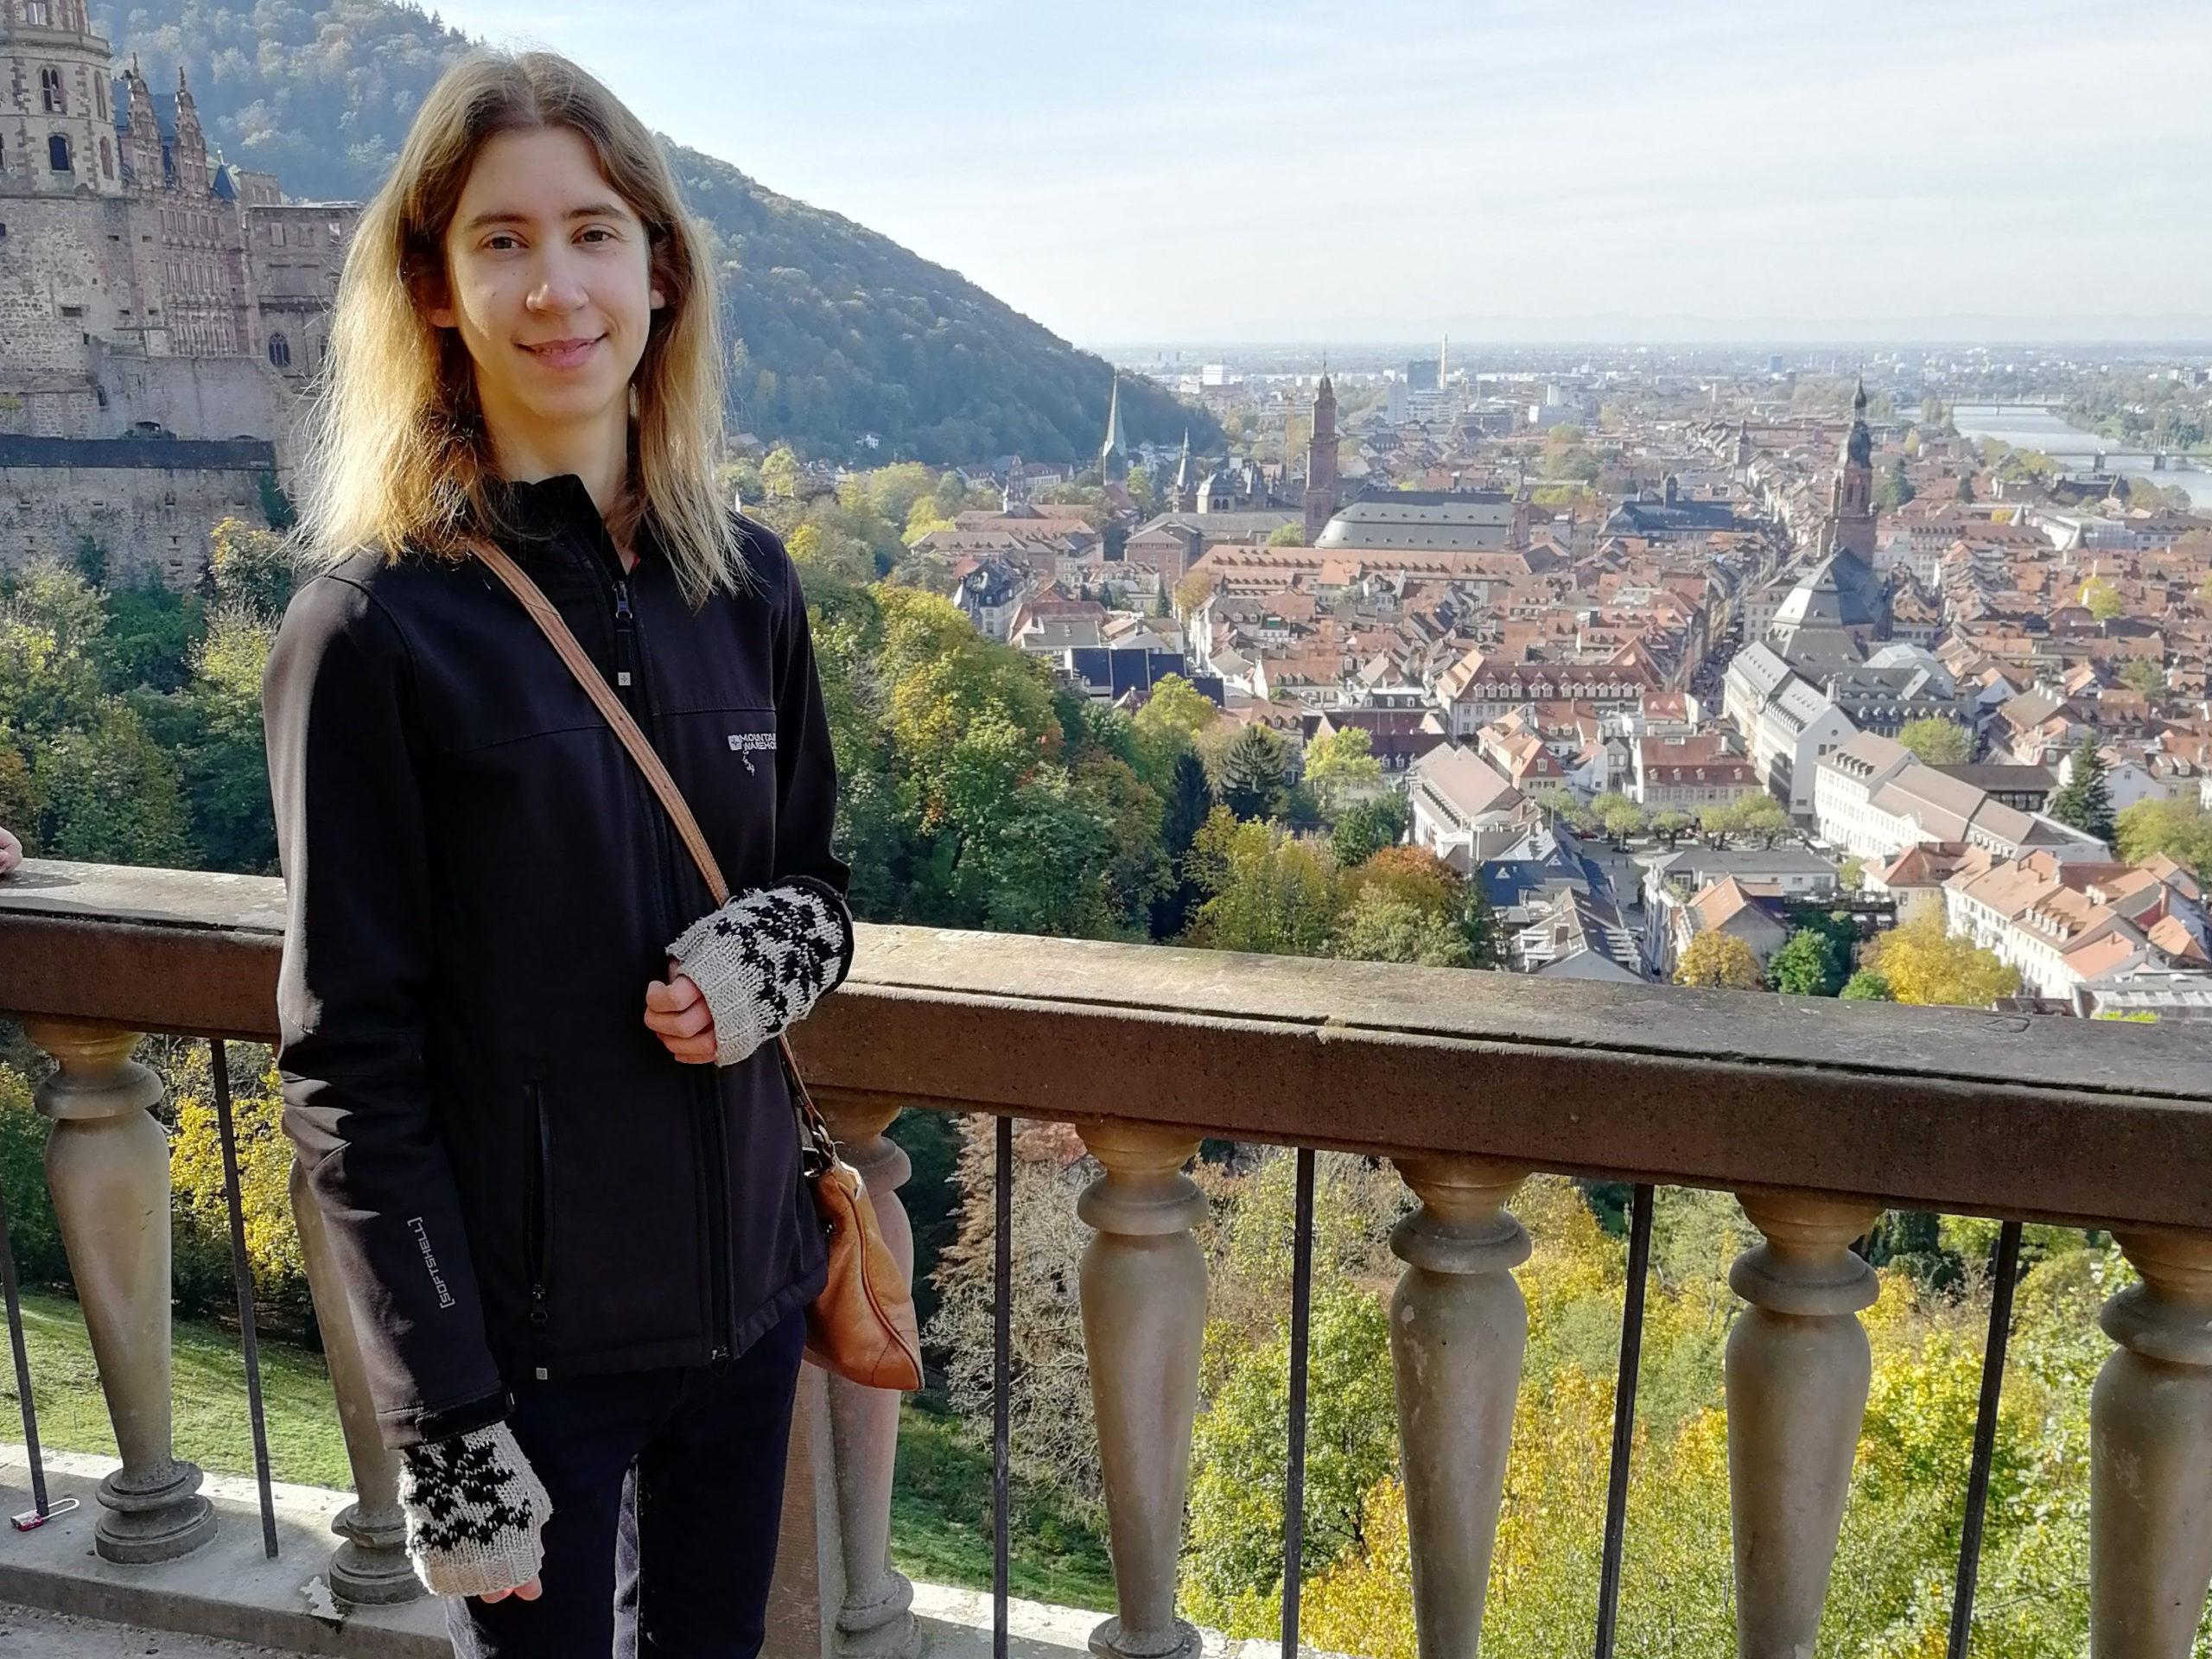 Towards entry "Dr. Alison Mitchell starts novel Emmy Noether group at ECAP"